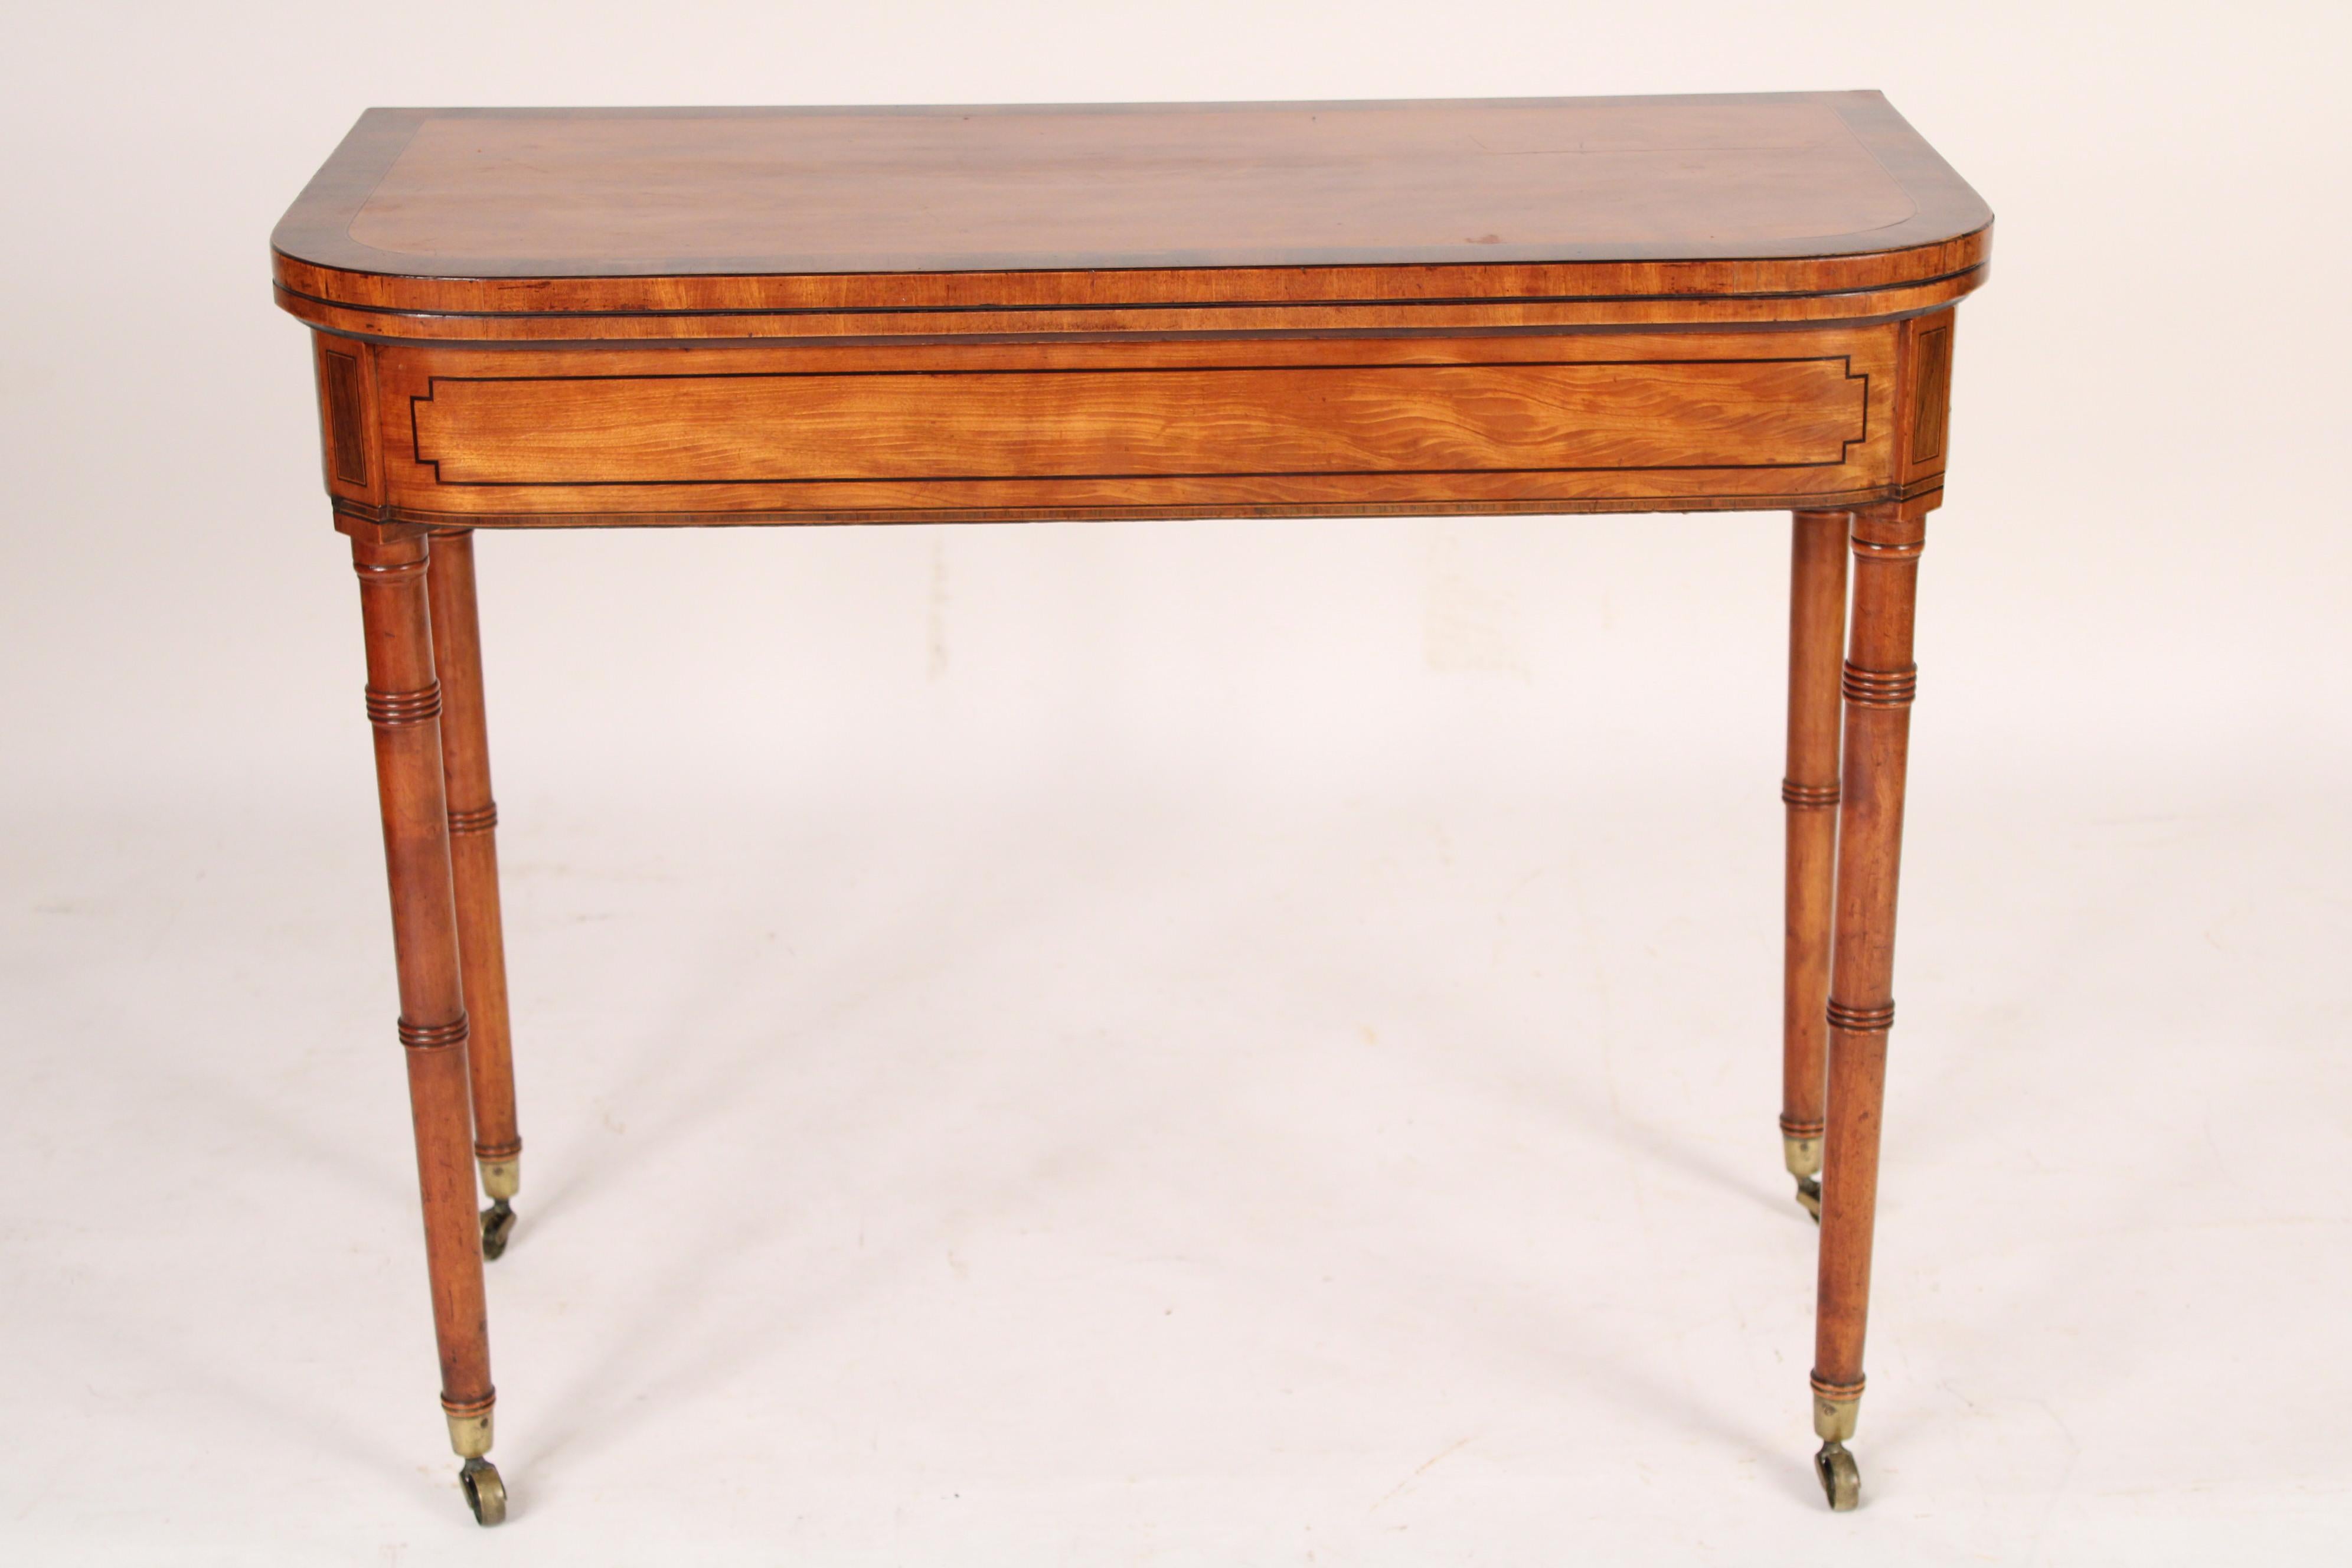 Antique George III style satin wood and rose wood D shaped console games table, 19th century. With a D shaped satin wood top with rose wood cross banding, a frieze with nicely grained satin wood and line inlay, 4 turned tapered legs with ring